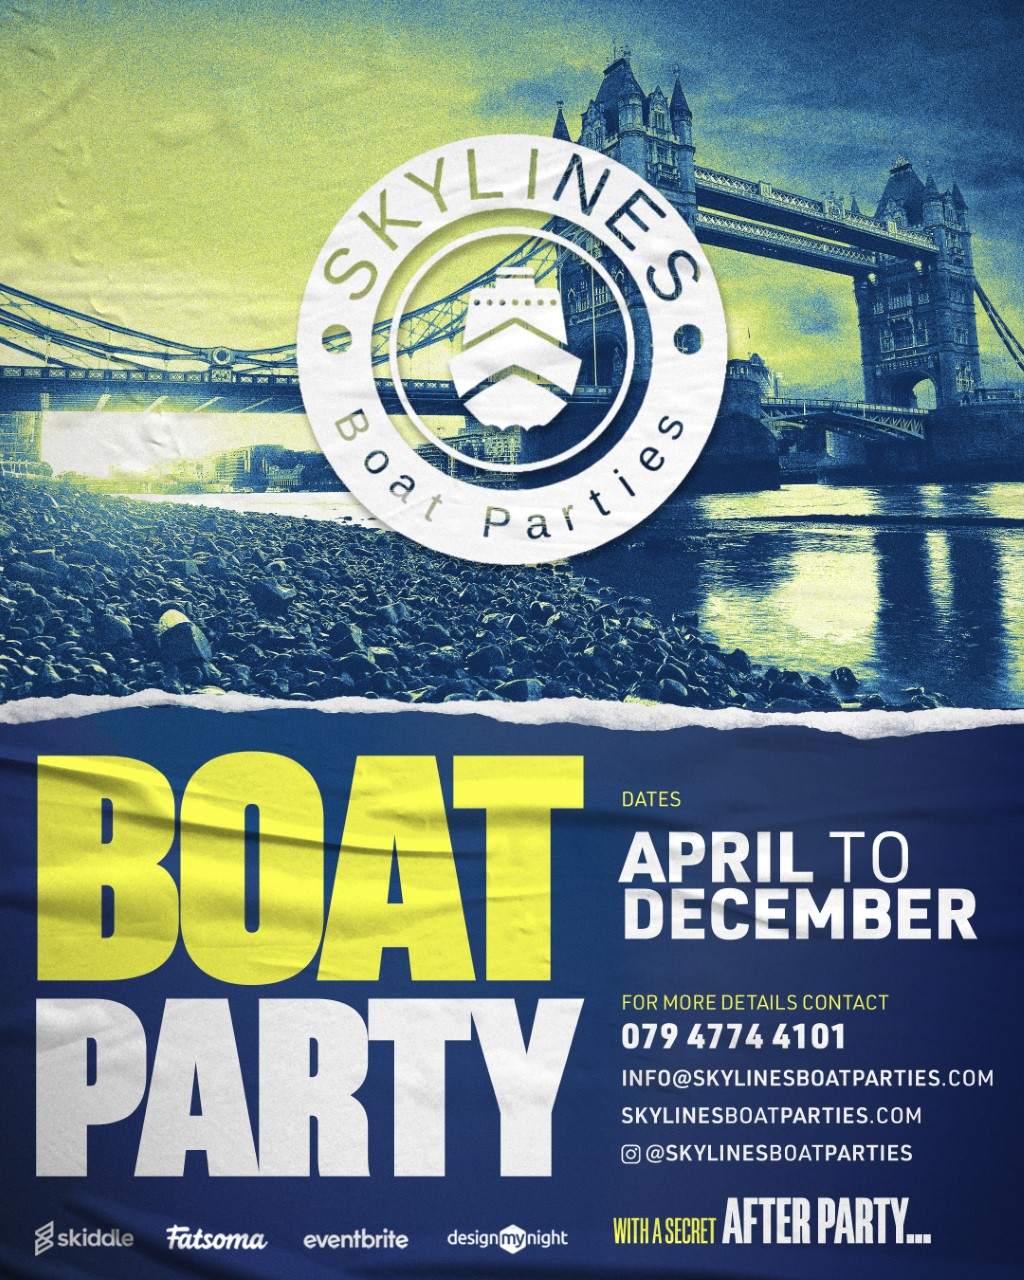 BOAT CELEBRATIONS ON THE THAMES WITH A SECRET AFTER PARTY AT EGG LONDON - フライヤー表